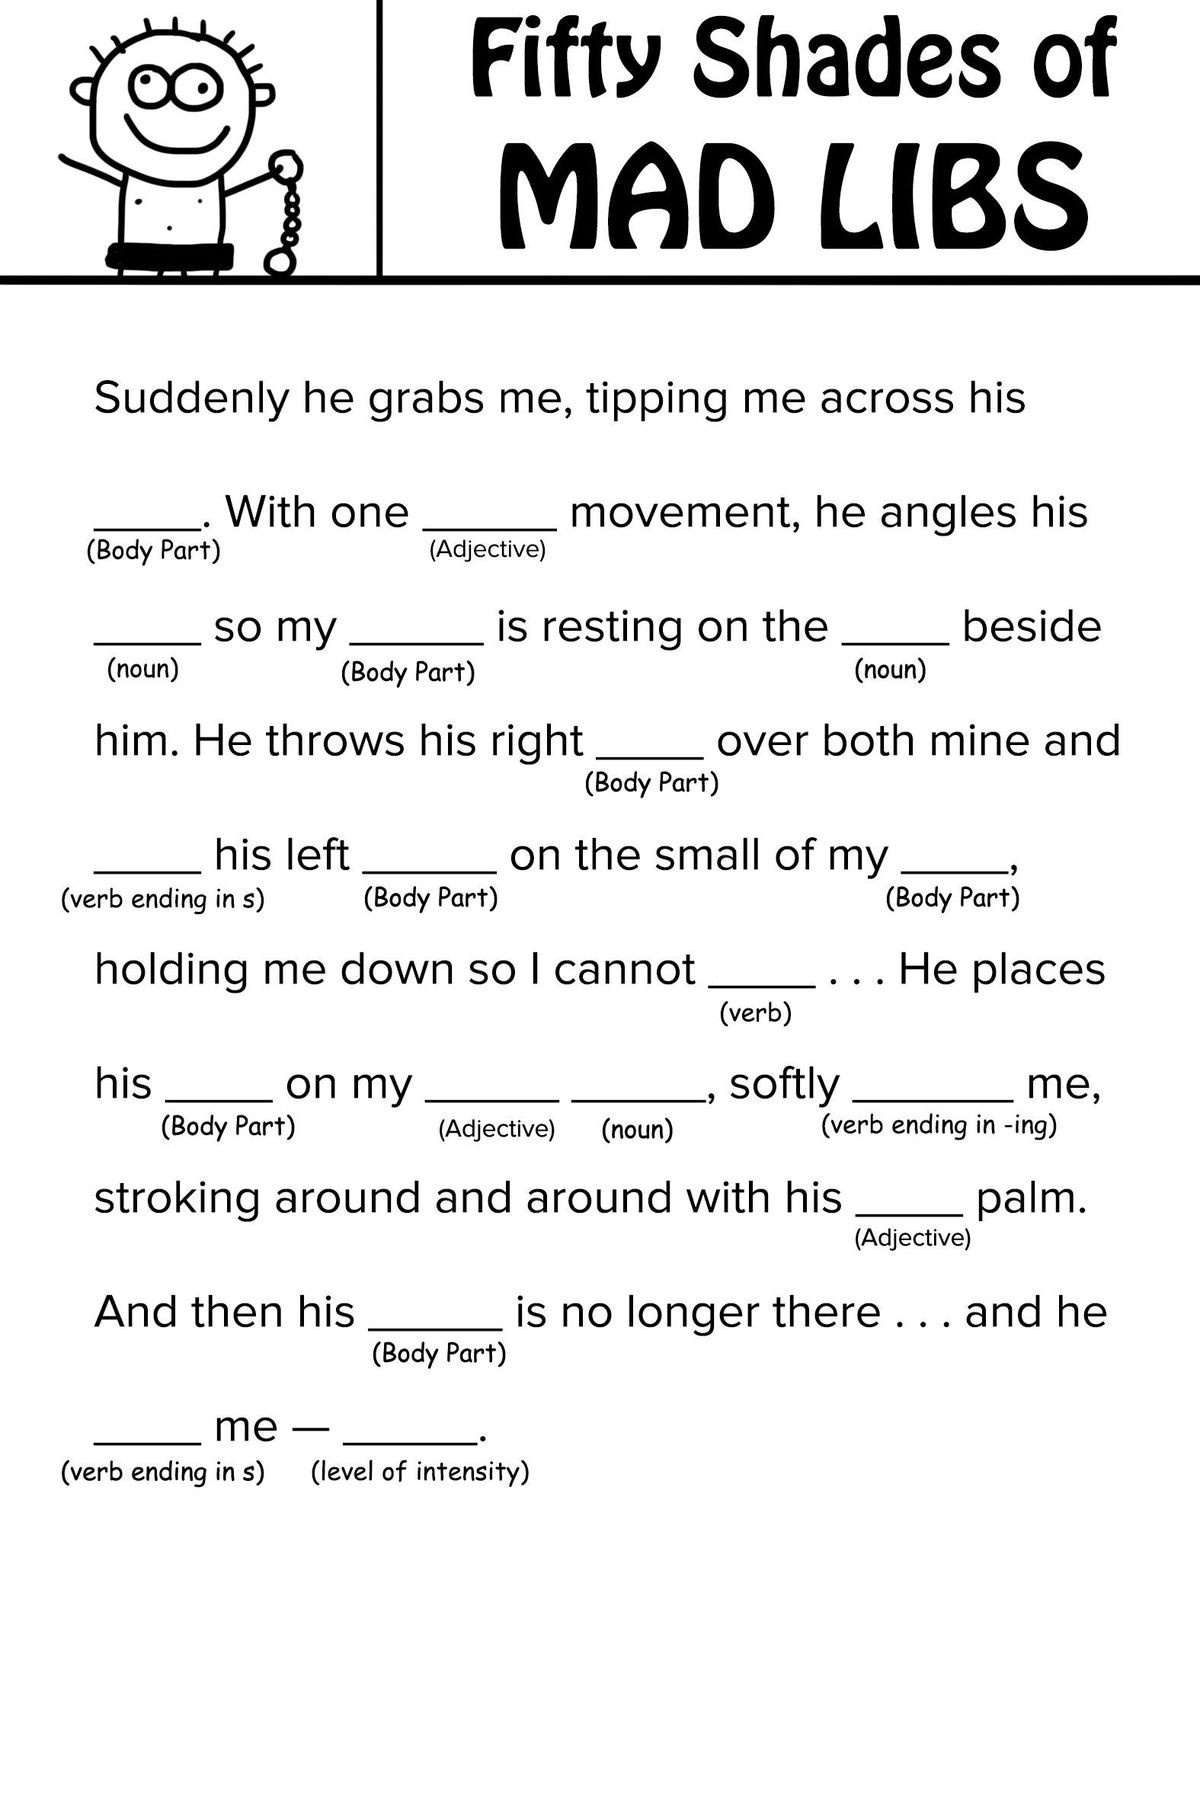 Free Printable Mad Libs For Kids (97+ Images In Collection) Page 2 - Free Printable Mad Libs For Middle School Students